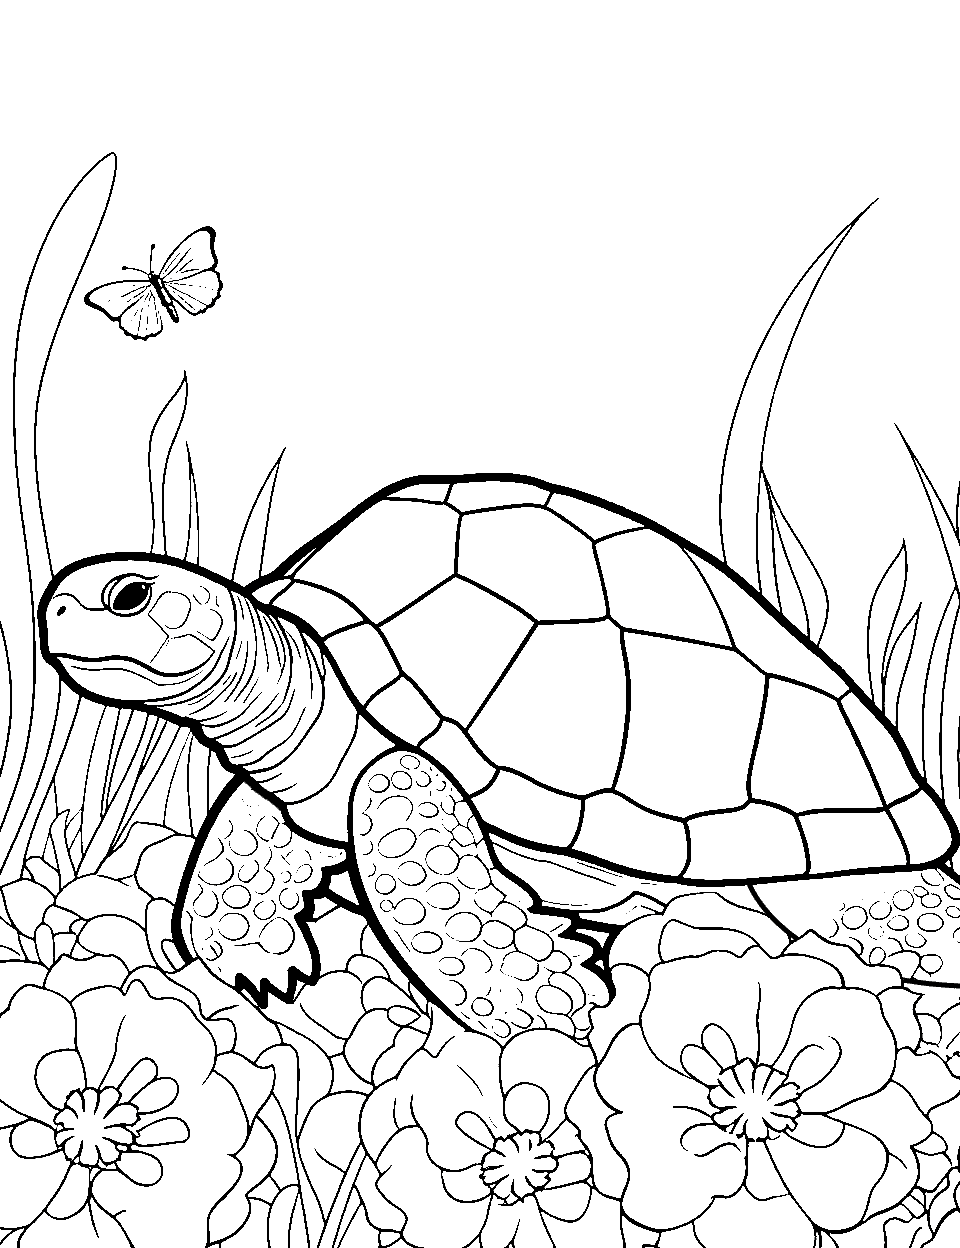 Turtle's Garden Visit Turtle Coloring Page - A turtle visiting a garden full of blooming flowers.